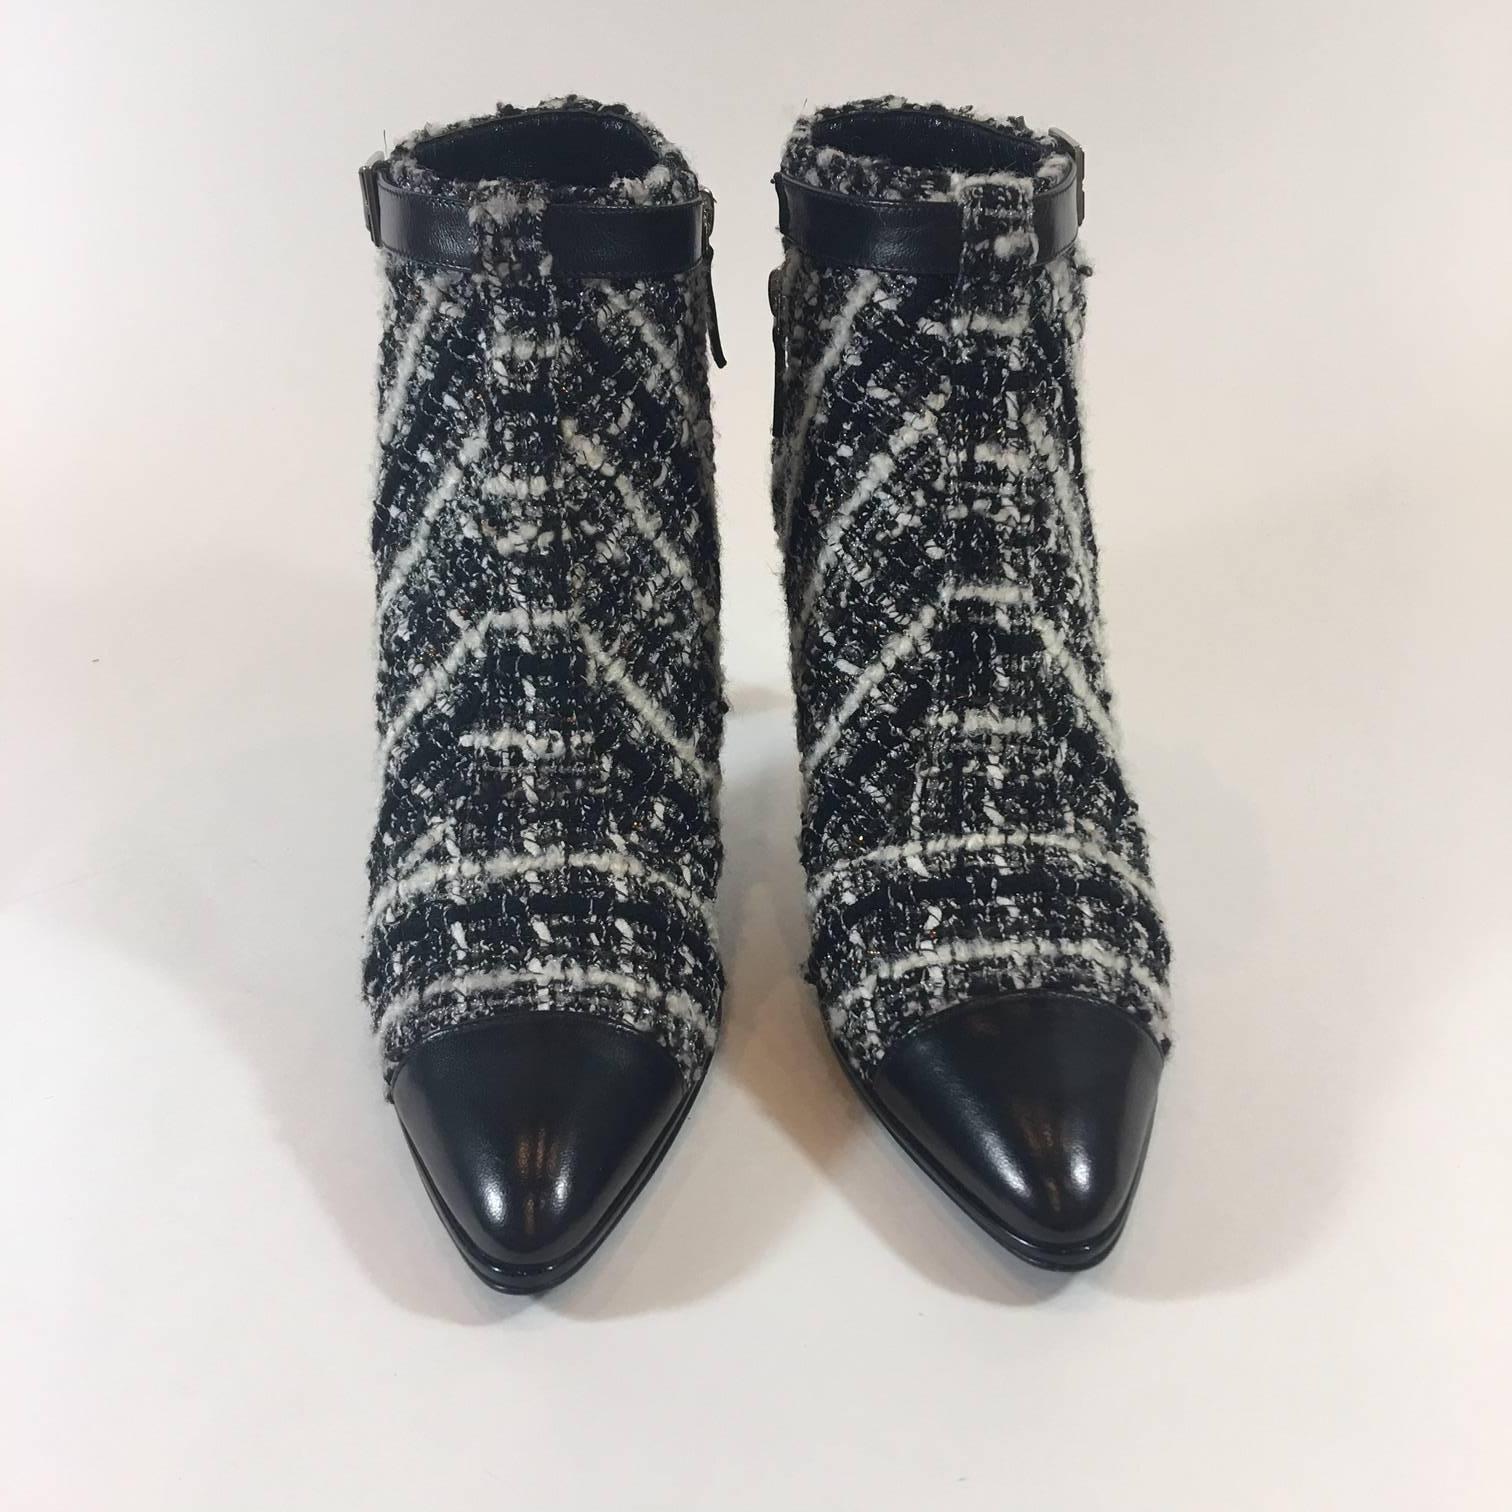 Stand tall in these stunning Chanel Boucle tweed ankle boots. Black leather toe, shiny patent heel and decorative black leather side buckle. Size zipper.  Size 40. Made in Italy. Never Worn. 3.5